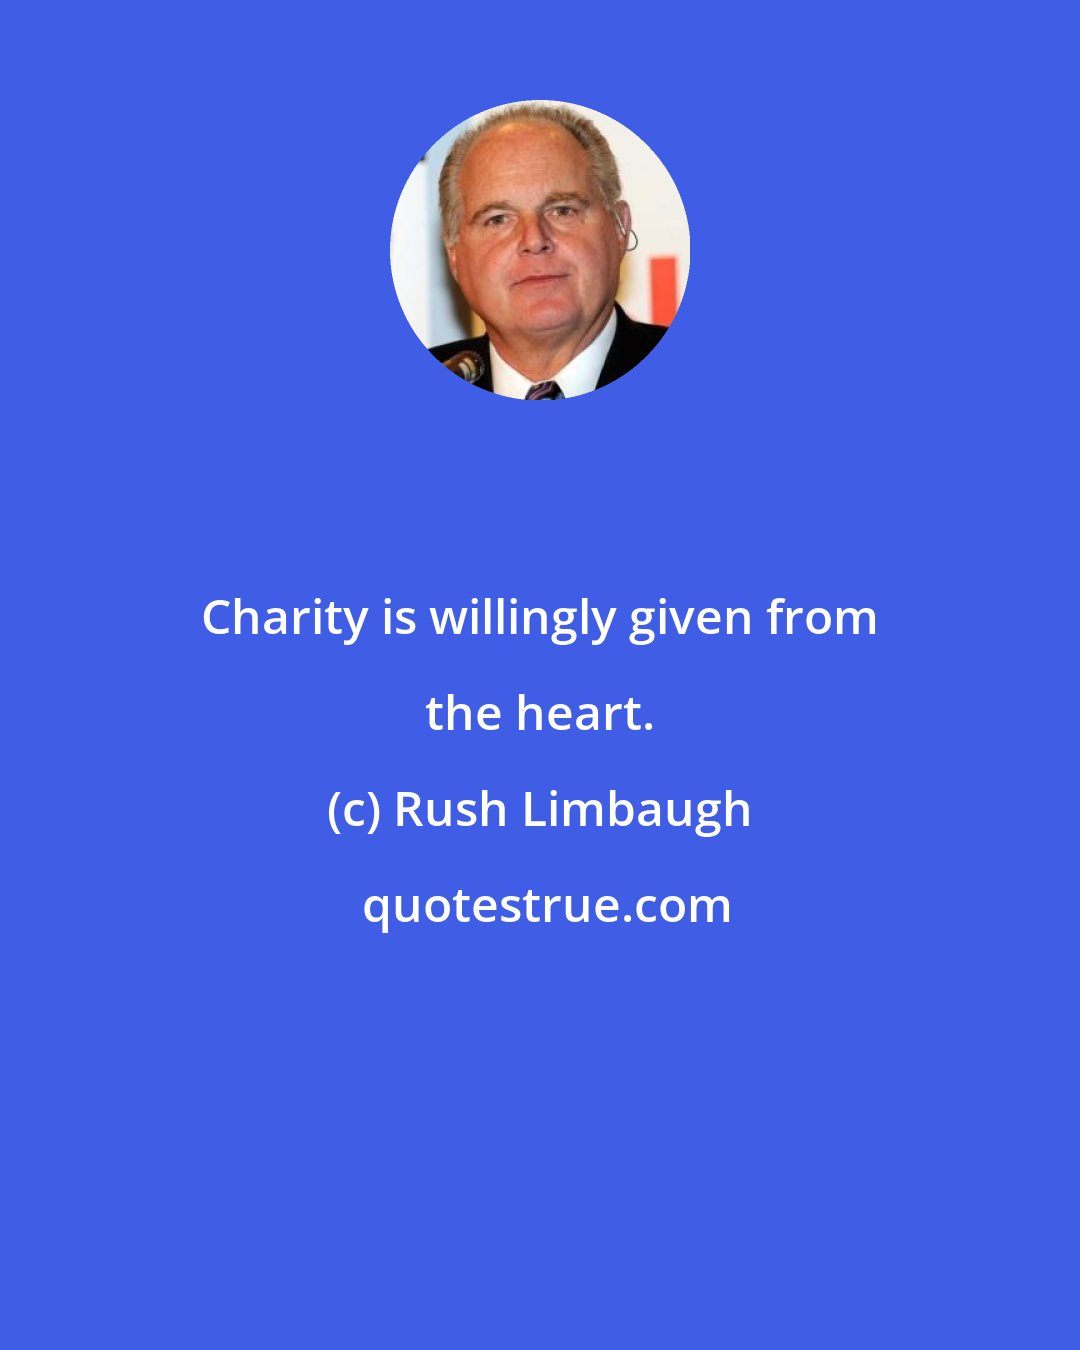 Rush Limbaugh: Charity is willingly given from the heart.